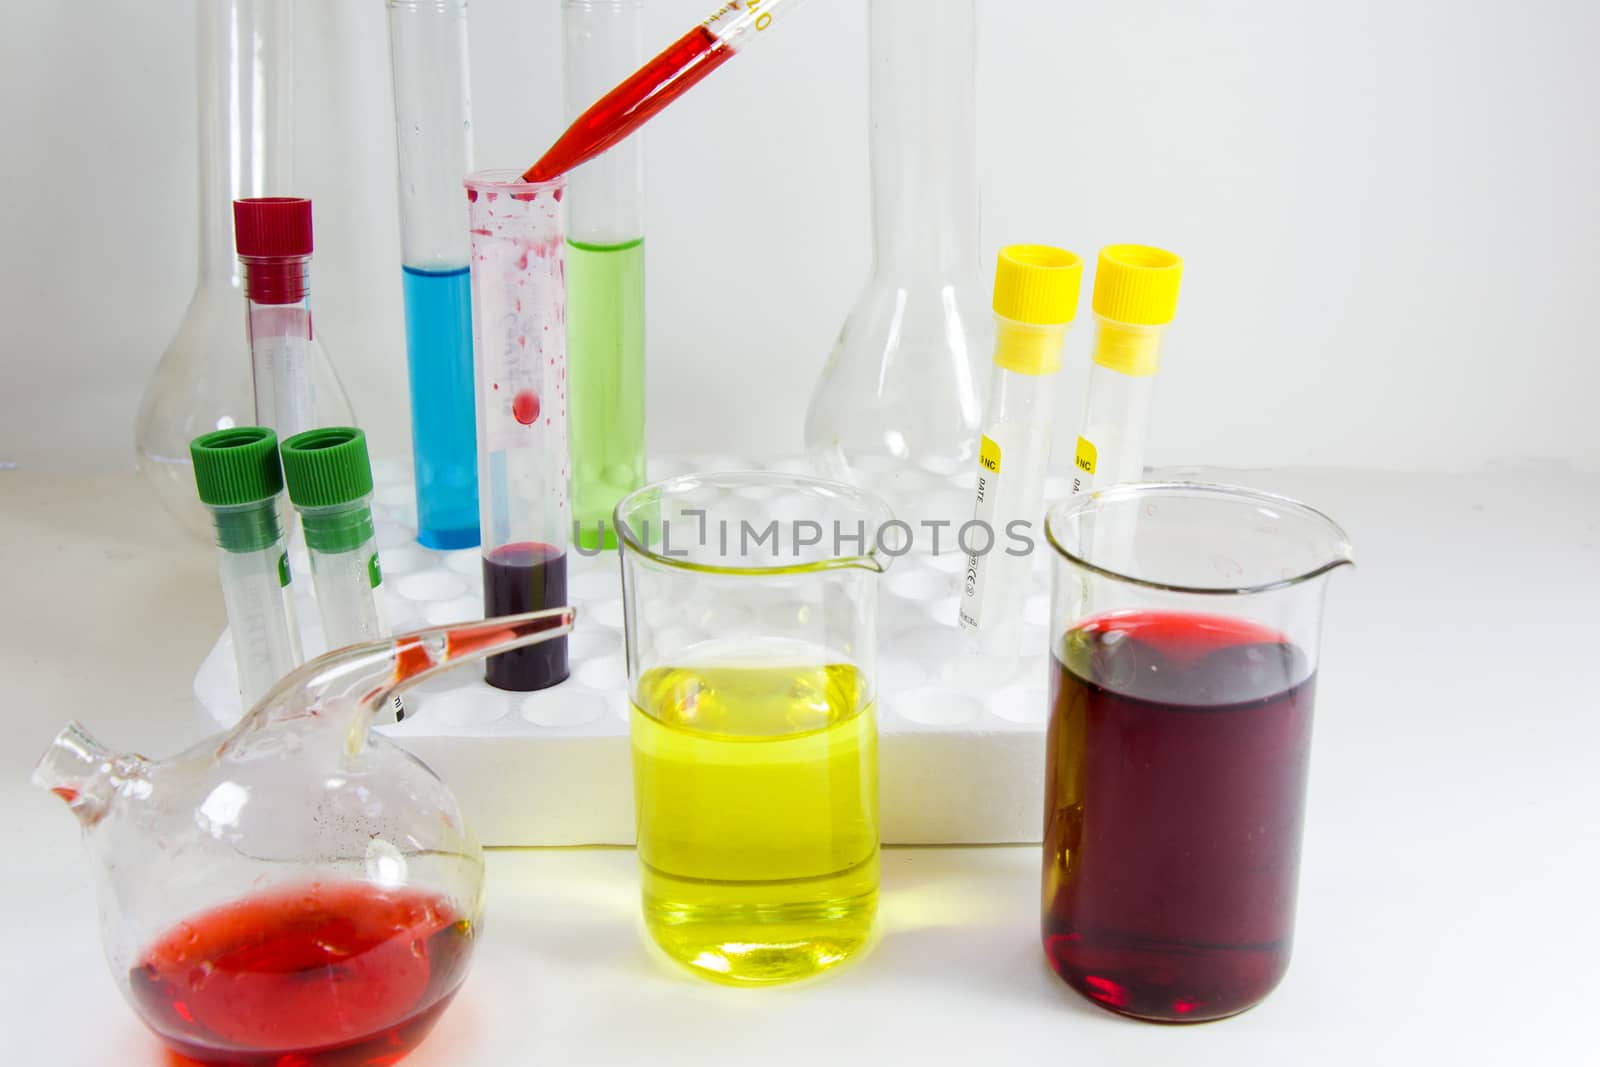 Laboratory chemical liquid elements and research diagnoses, instruments and objects in the sterile table, glassware and pipette. Studio shoot.